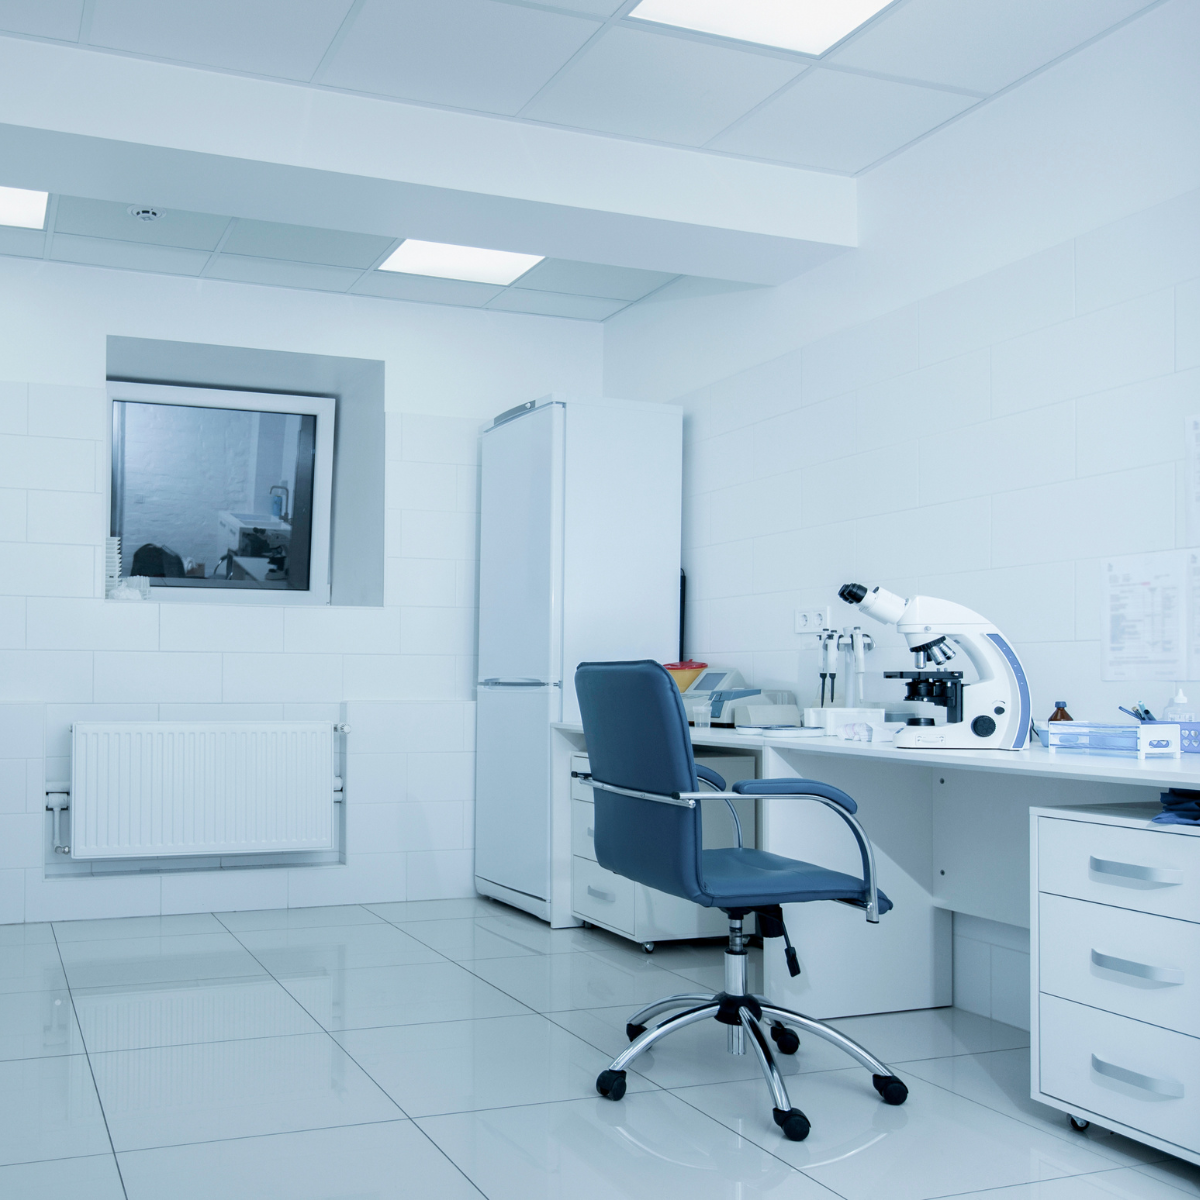 Modular Devices, a Portfolio Company of O2 Investment Partners, Partners with Flow Clean Rooms and Supply to Bolster Existing Clean Room Manufacturing Capabilities and Expand Overall Offering